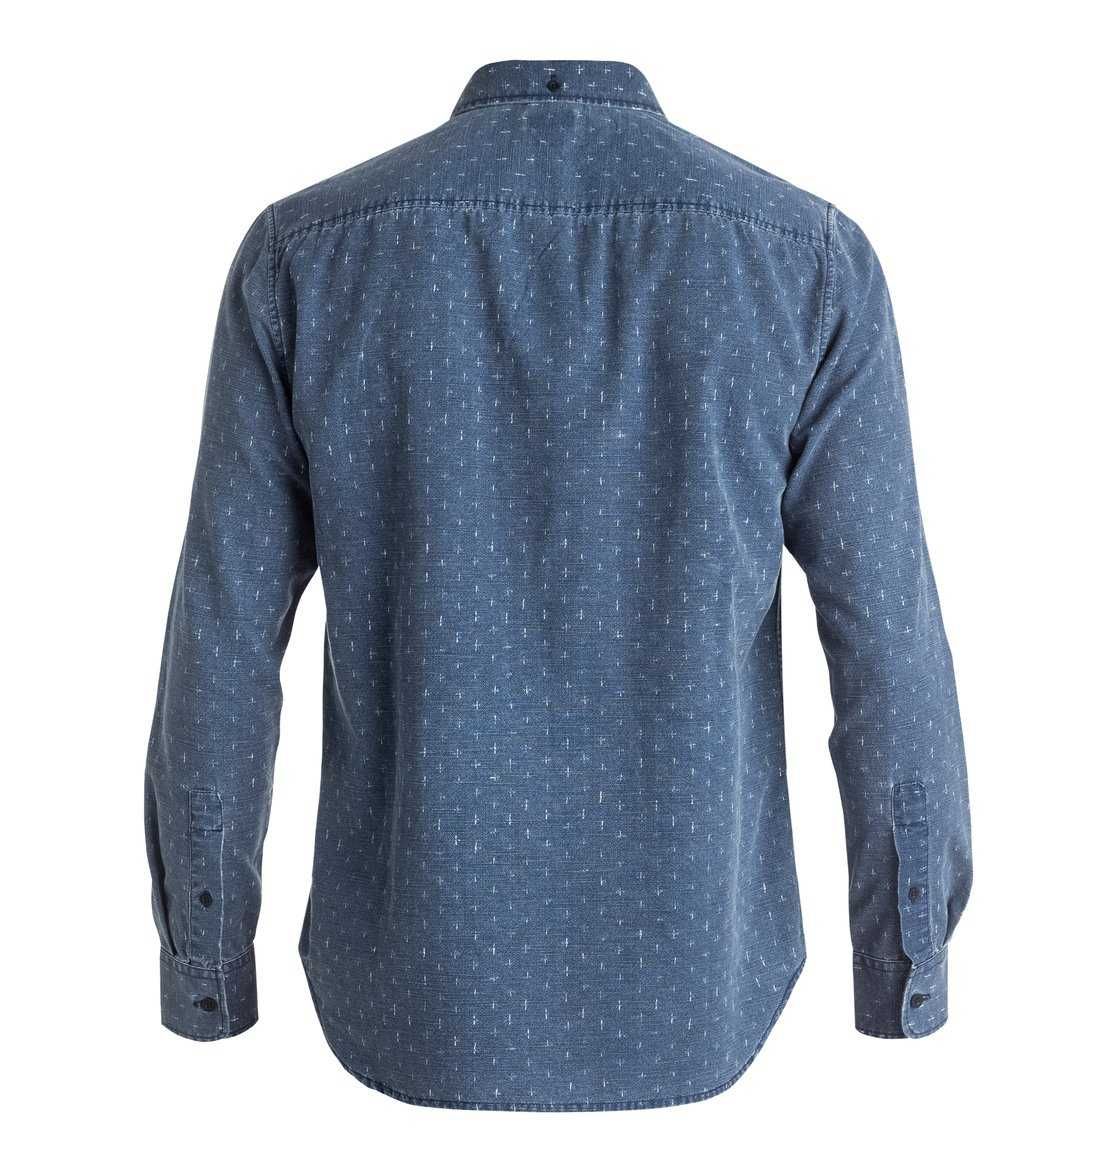 Sidnaw - Chemise à manches longues - Blue Artisanal